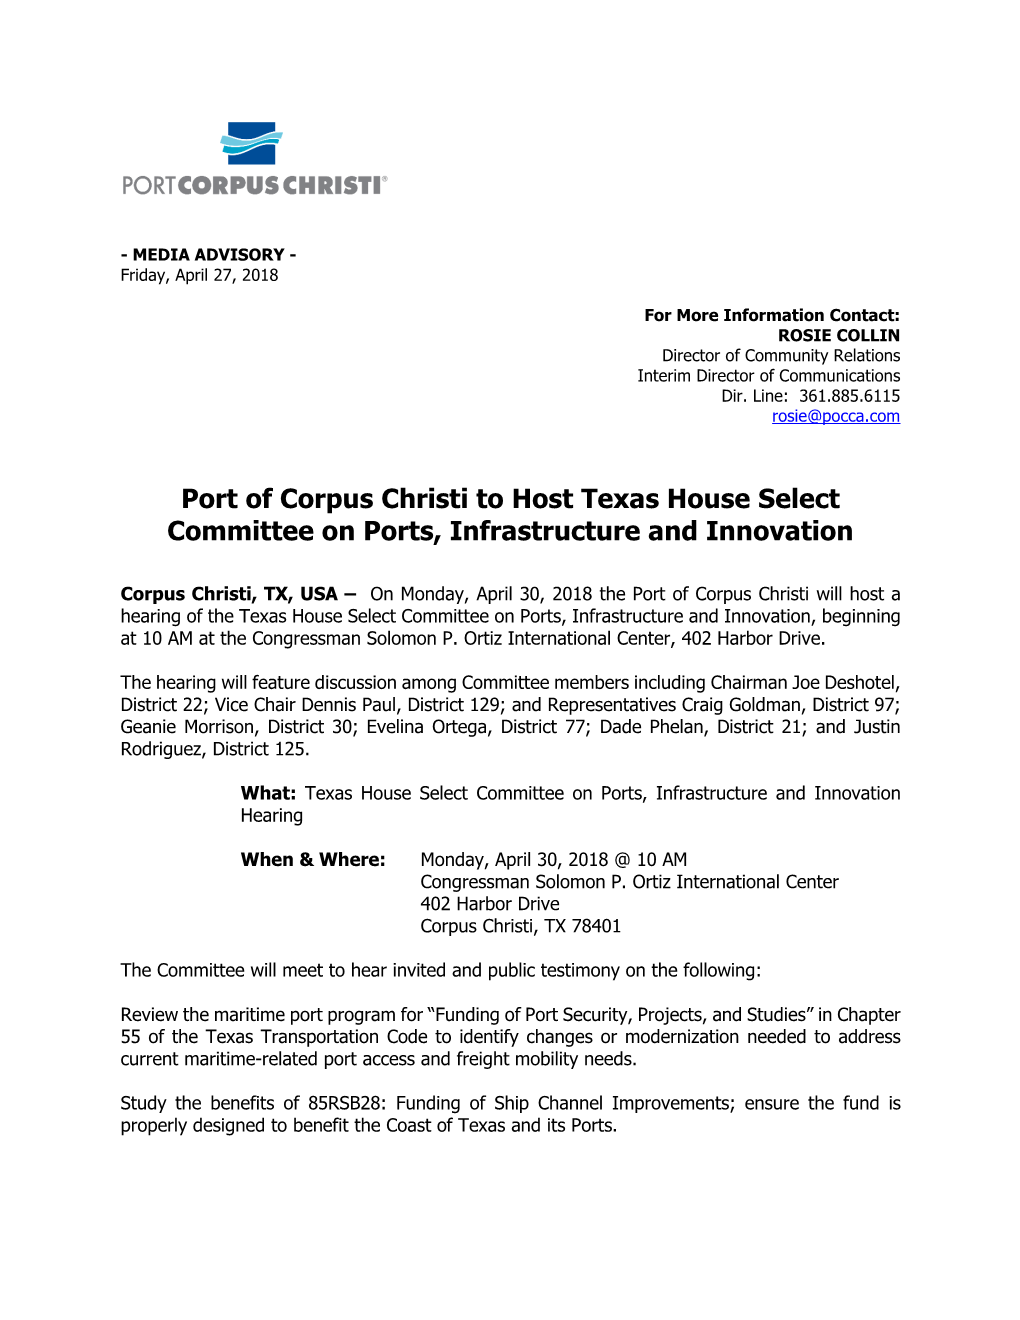 Port of Corpus Christi to Host Texas House Select Committee on Ports, Infrastructure and Innovation